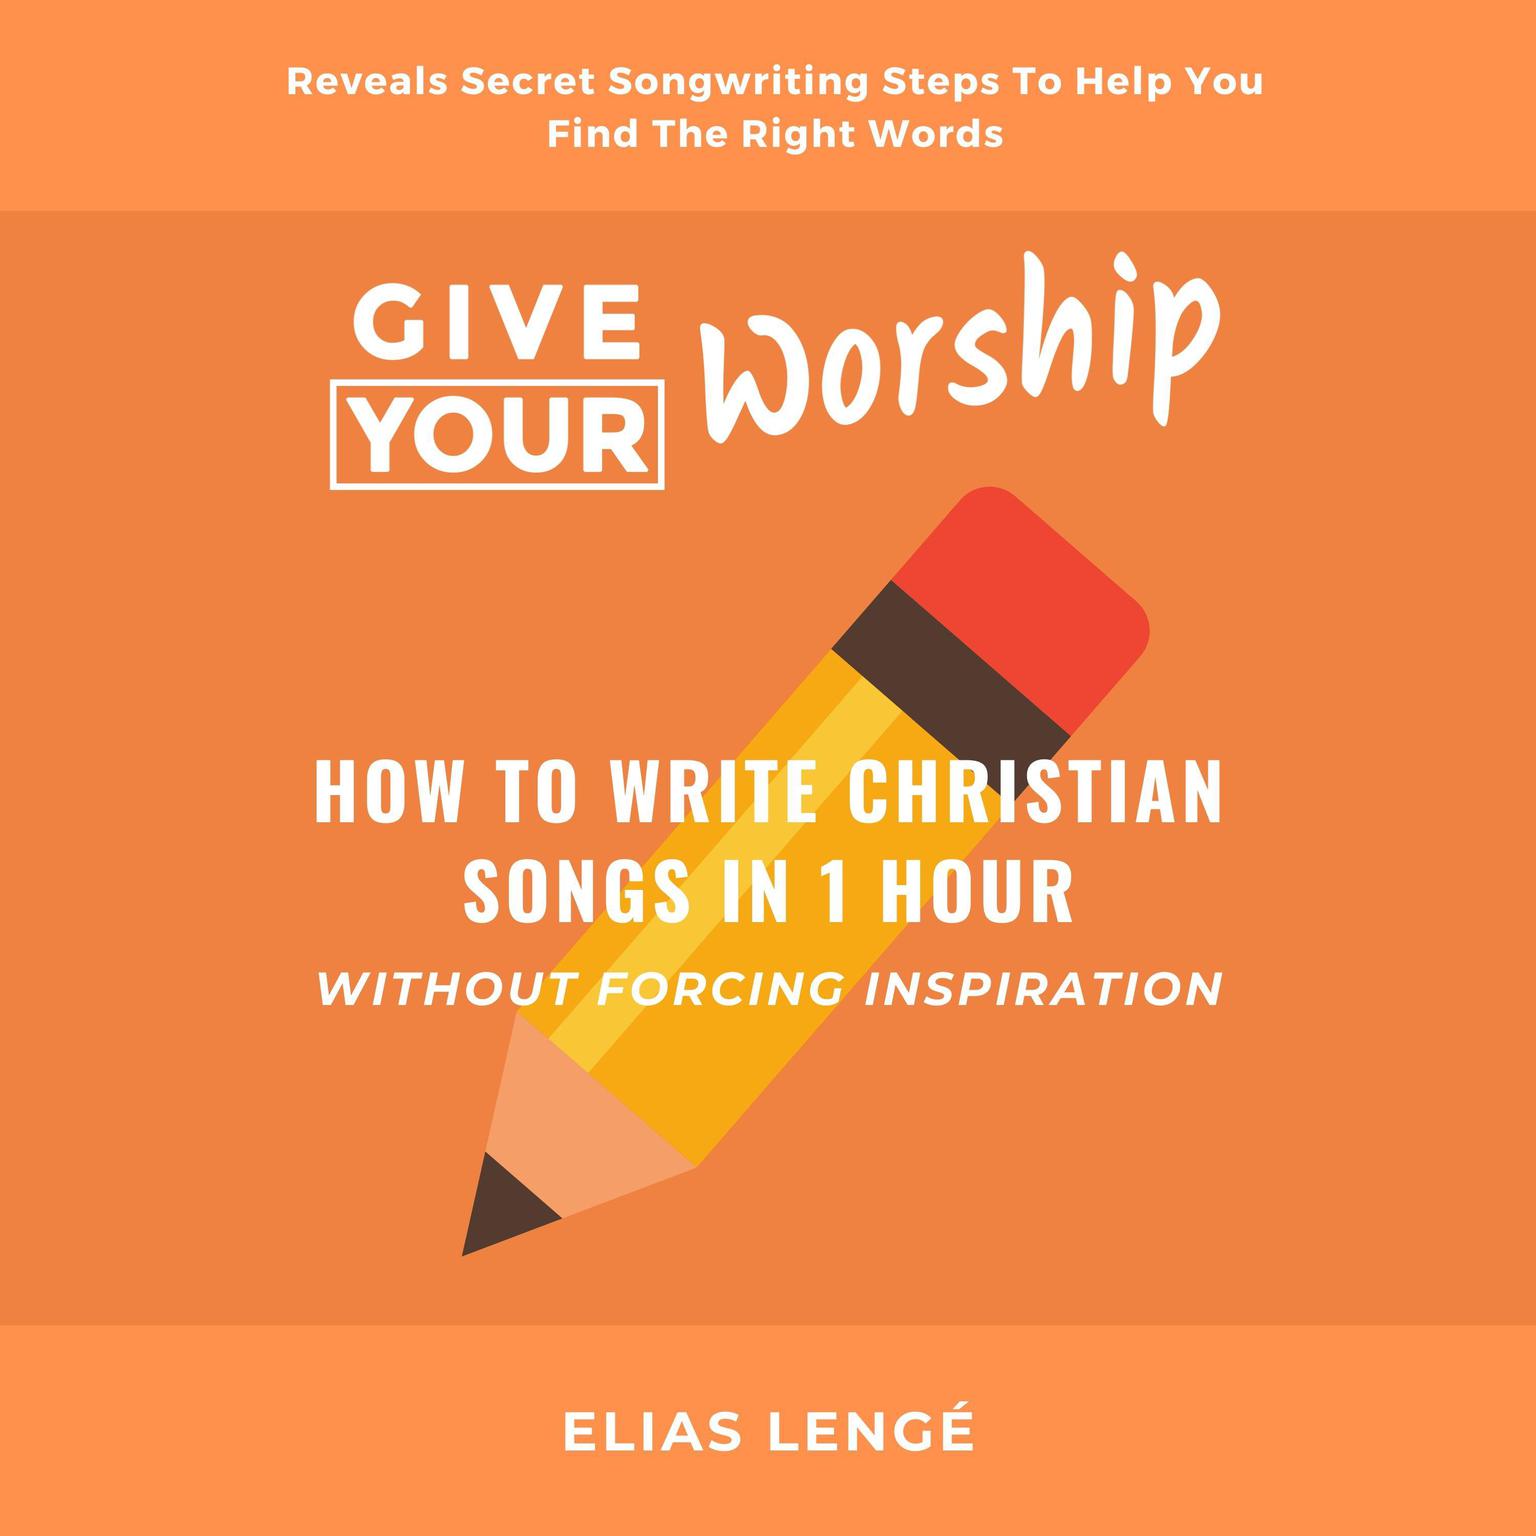 Give Your Worship: How To Write Christian Songs In 1 Hour Without Forcing Inspiration Audiobook, by Elias lenge